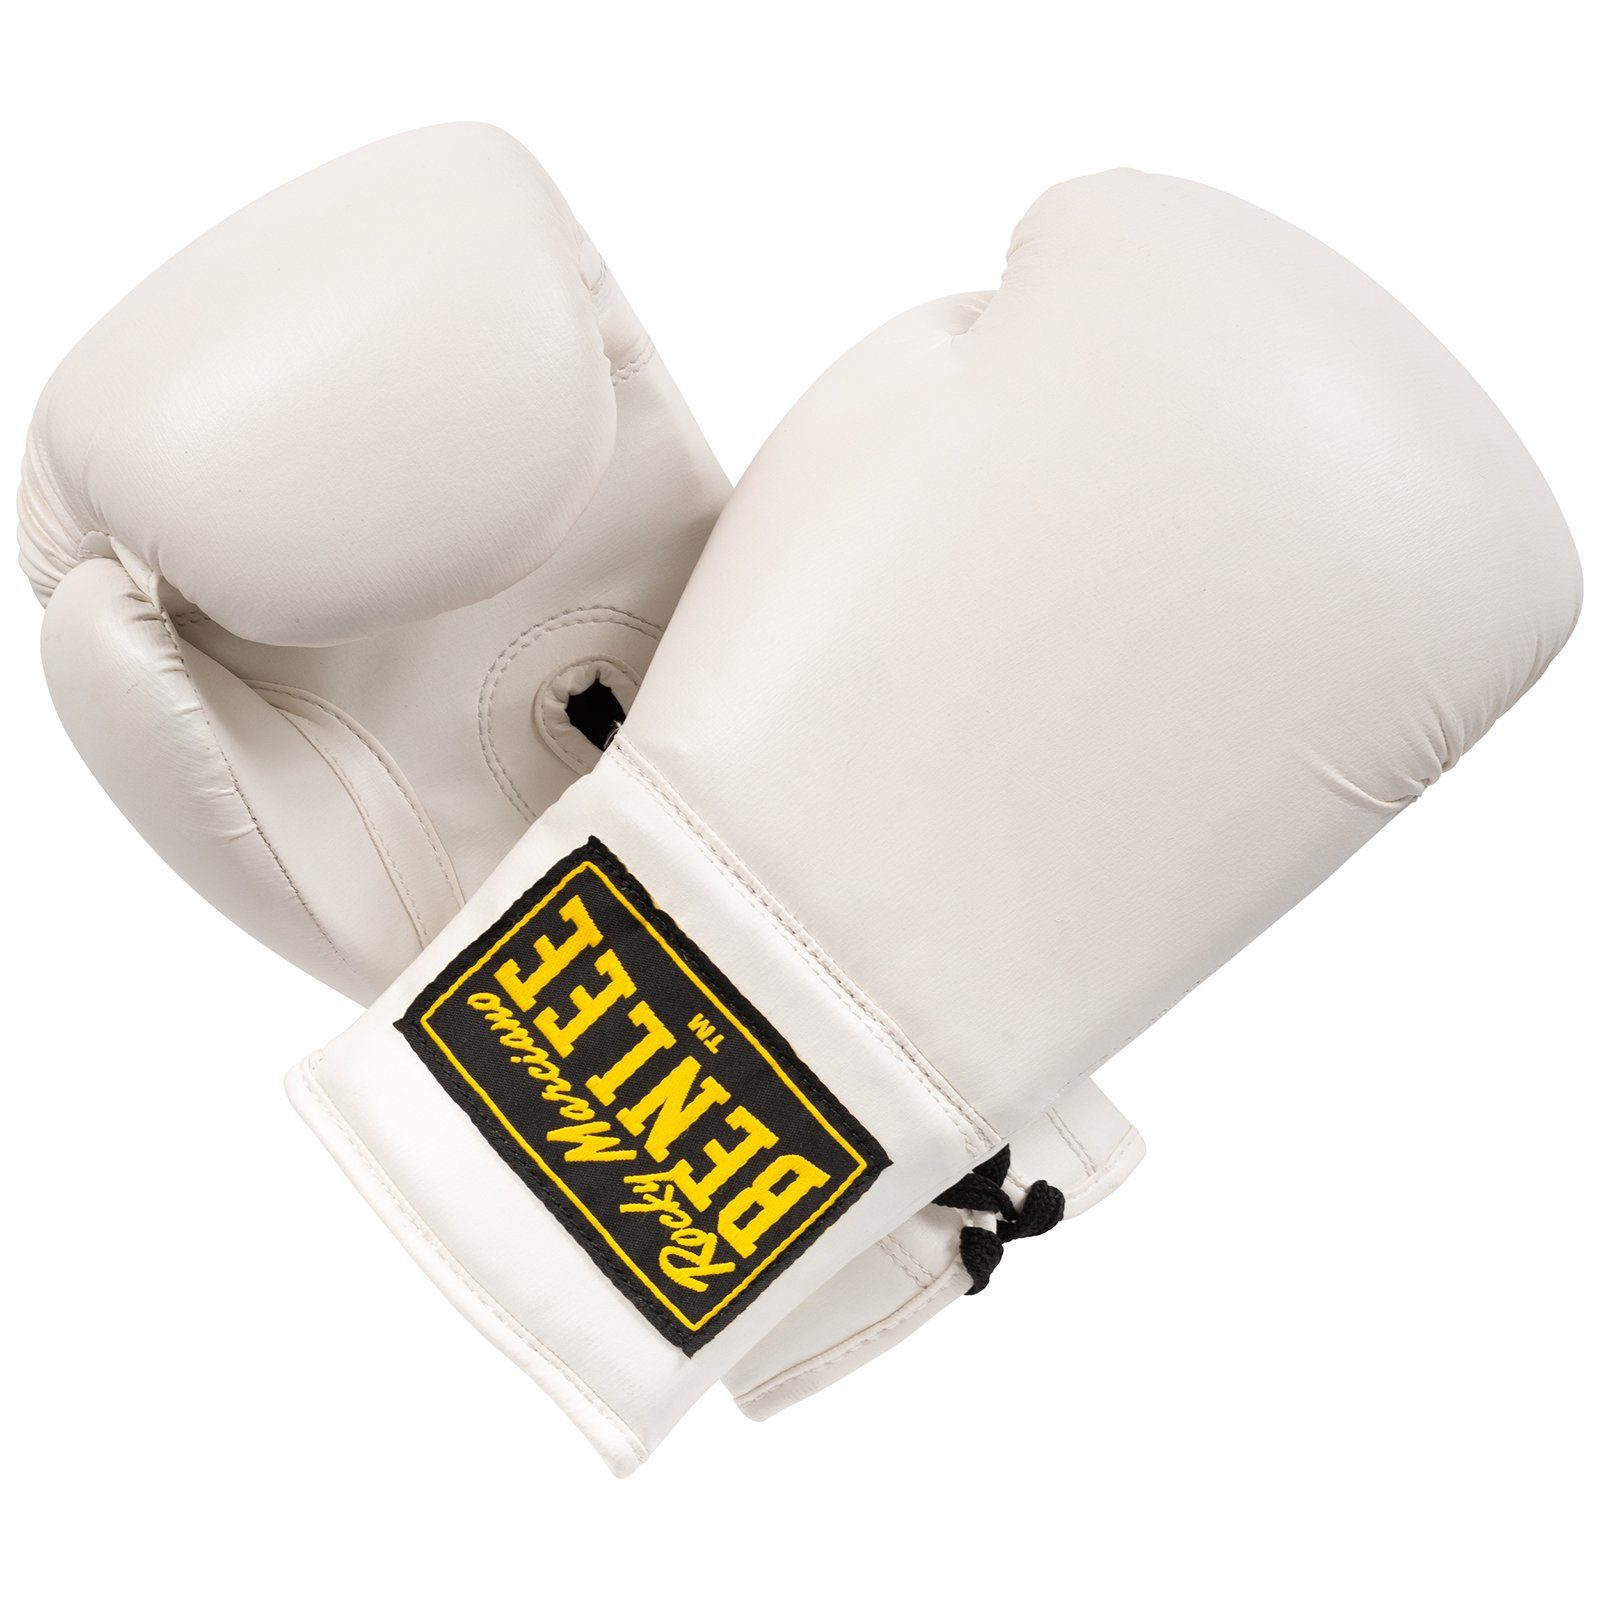 Benlee Rocky Marciano Boxhandschuhe GLOVES White AUTOGRAPH